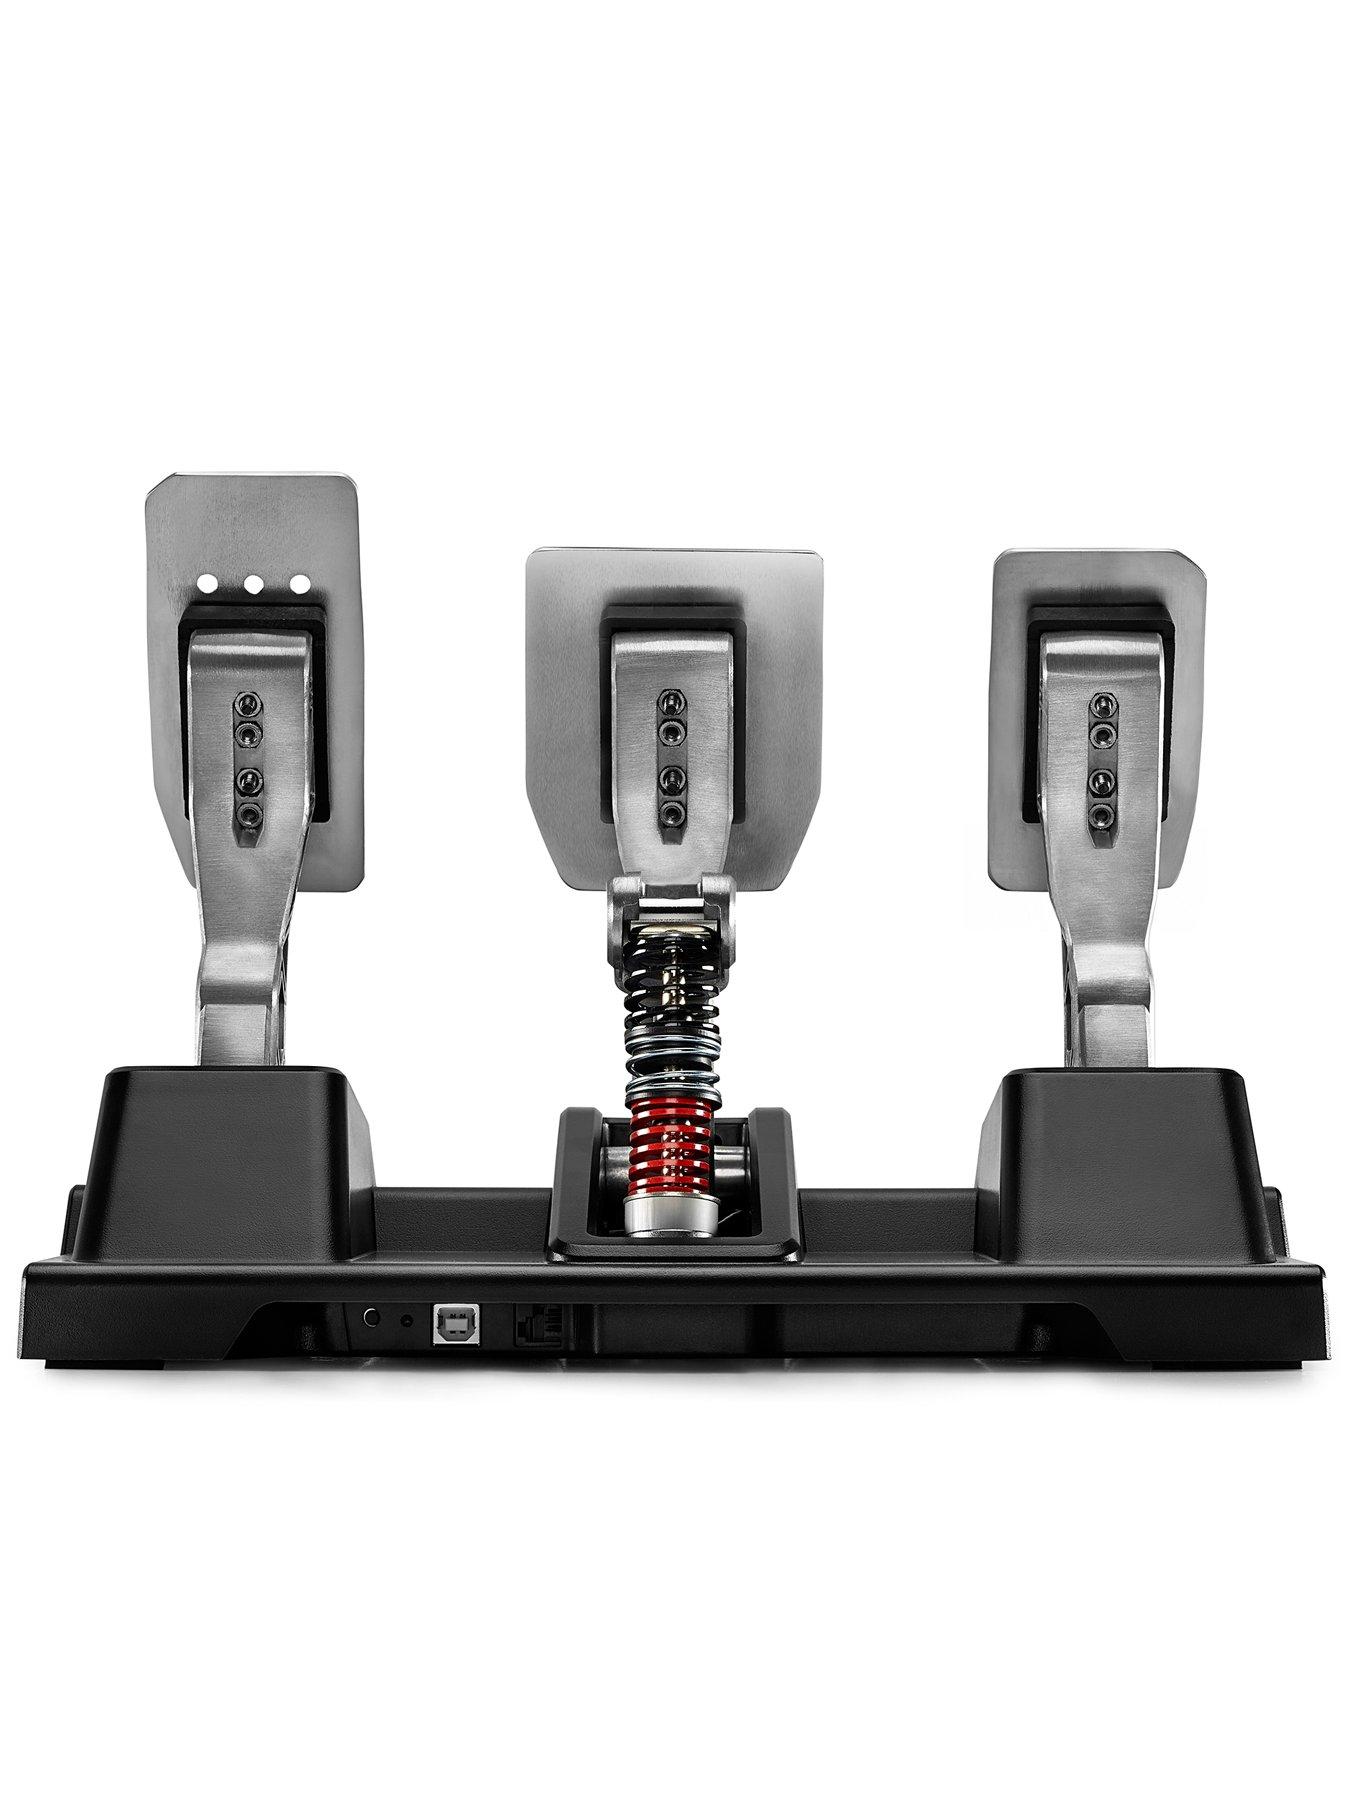 Thrustmaster T-LCM Pedals (Compatible with PS5, PS4, XBOX Series X/S, One,  PC)